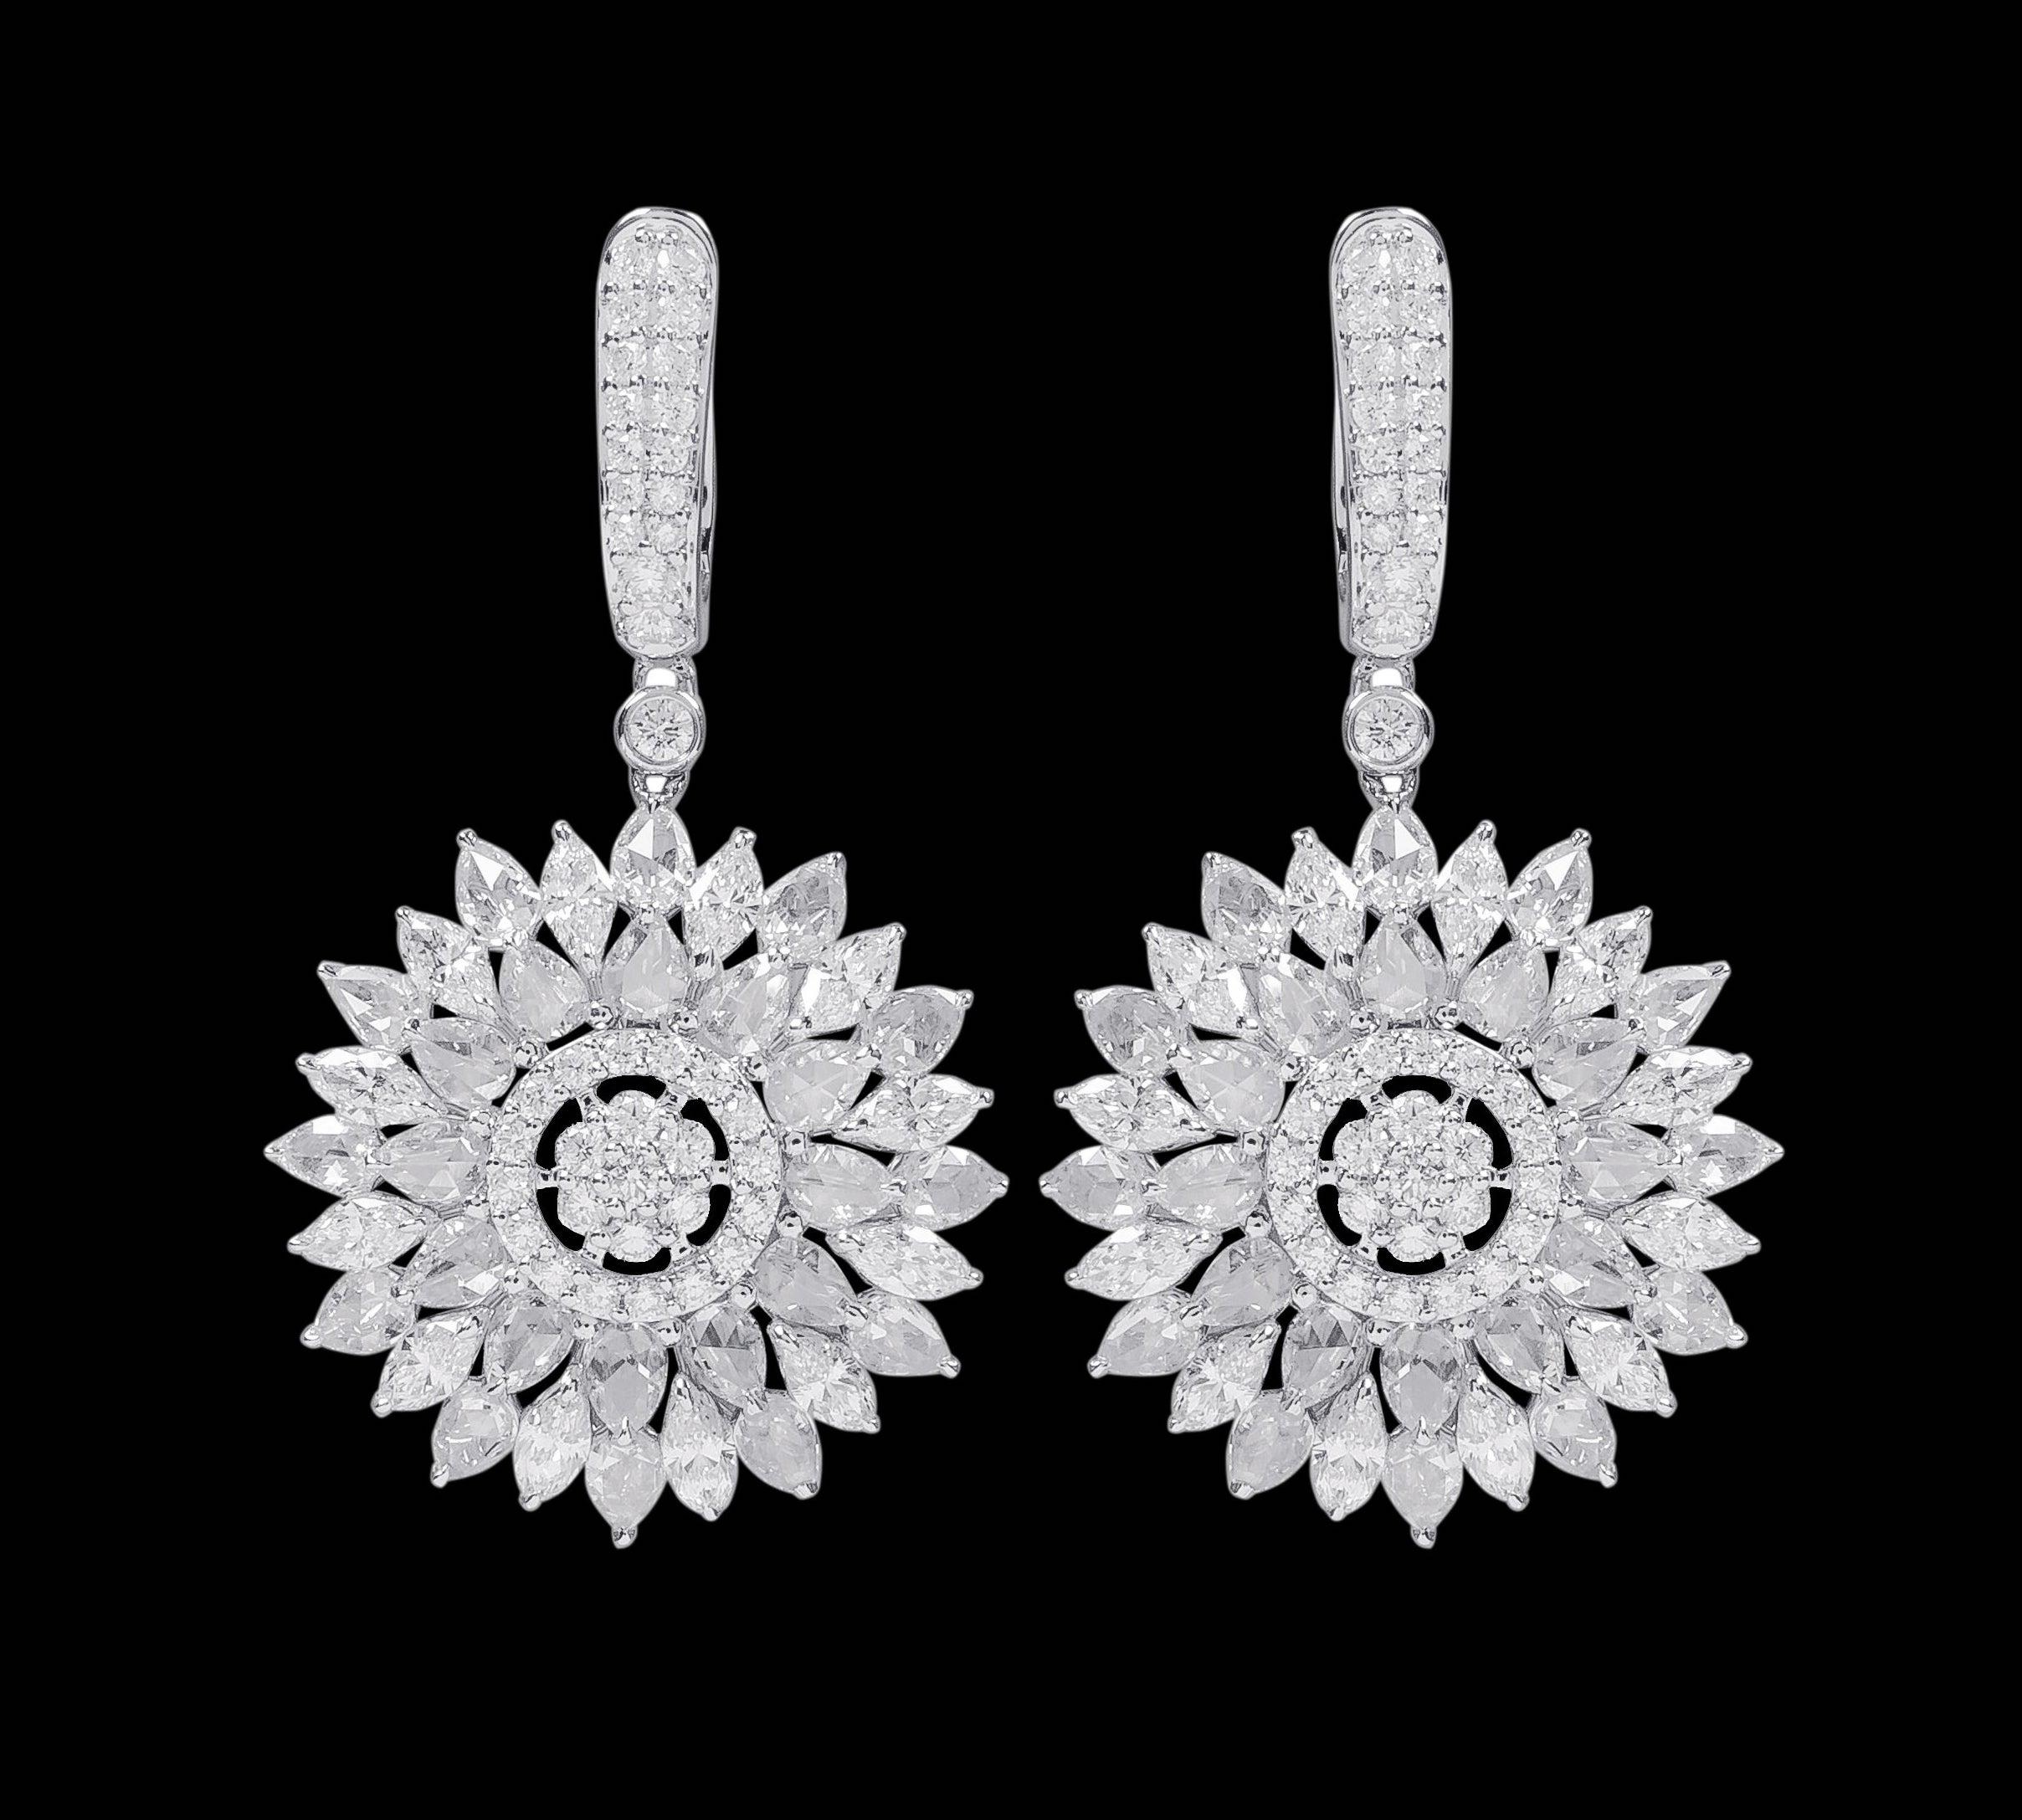 18 Karat White Gold 6.41 Carat Diamond Drop Flower Statement Earrings

This phenomenal mixed solitaire diamond blazing sun earring is vividly magical. The design is magnificently created in various levels to fire up the sun/chakra with the